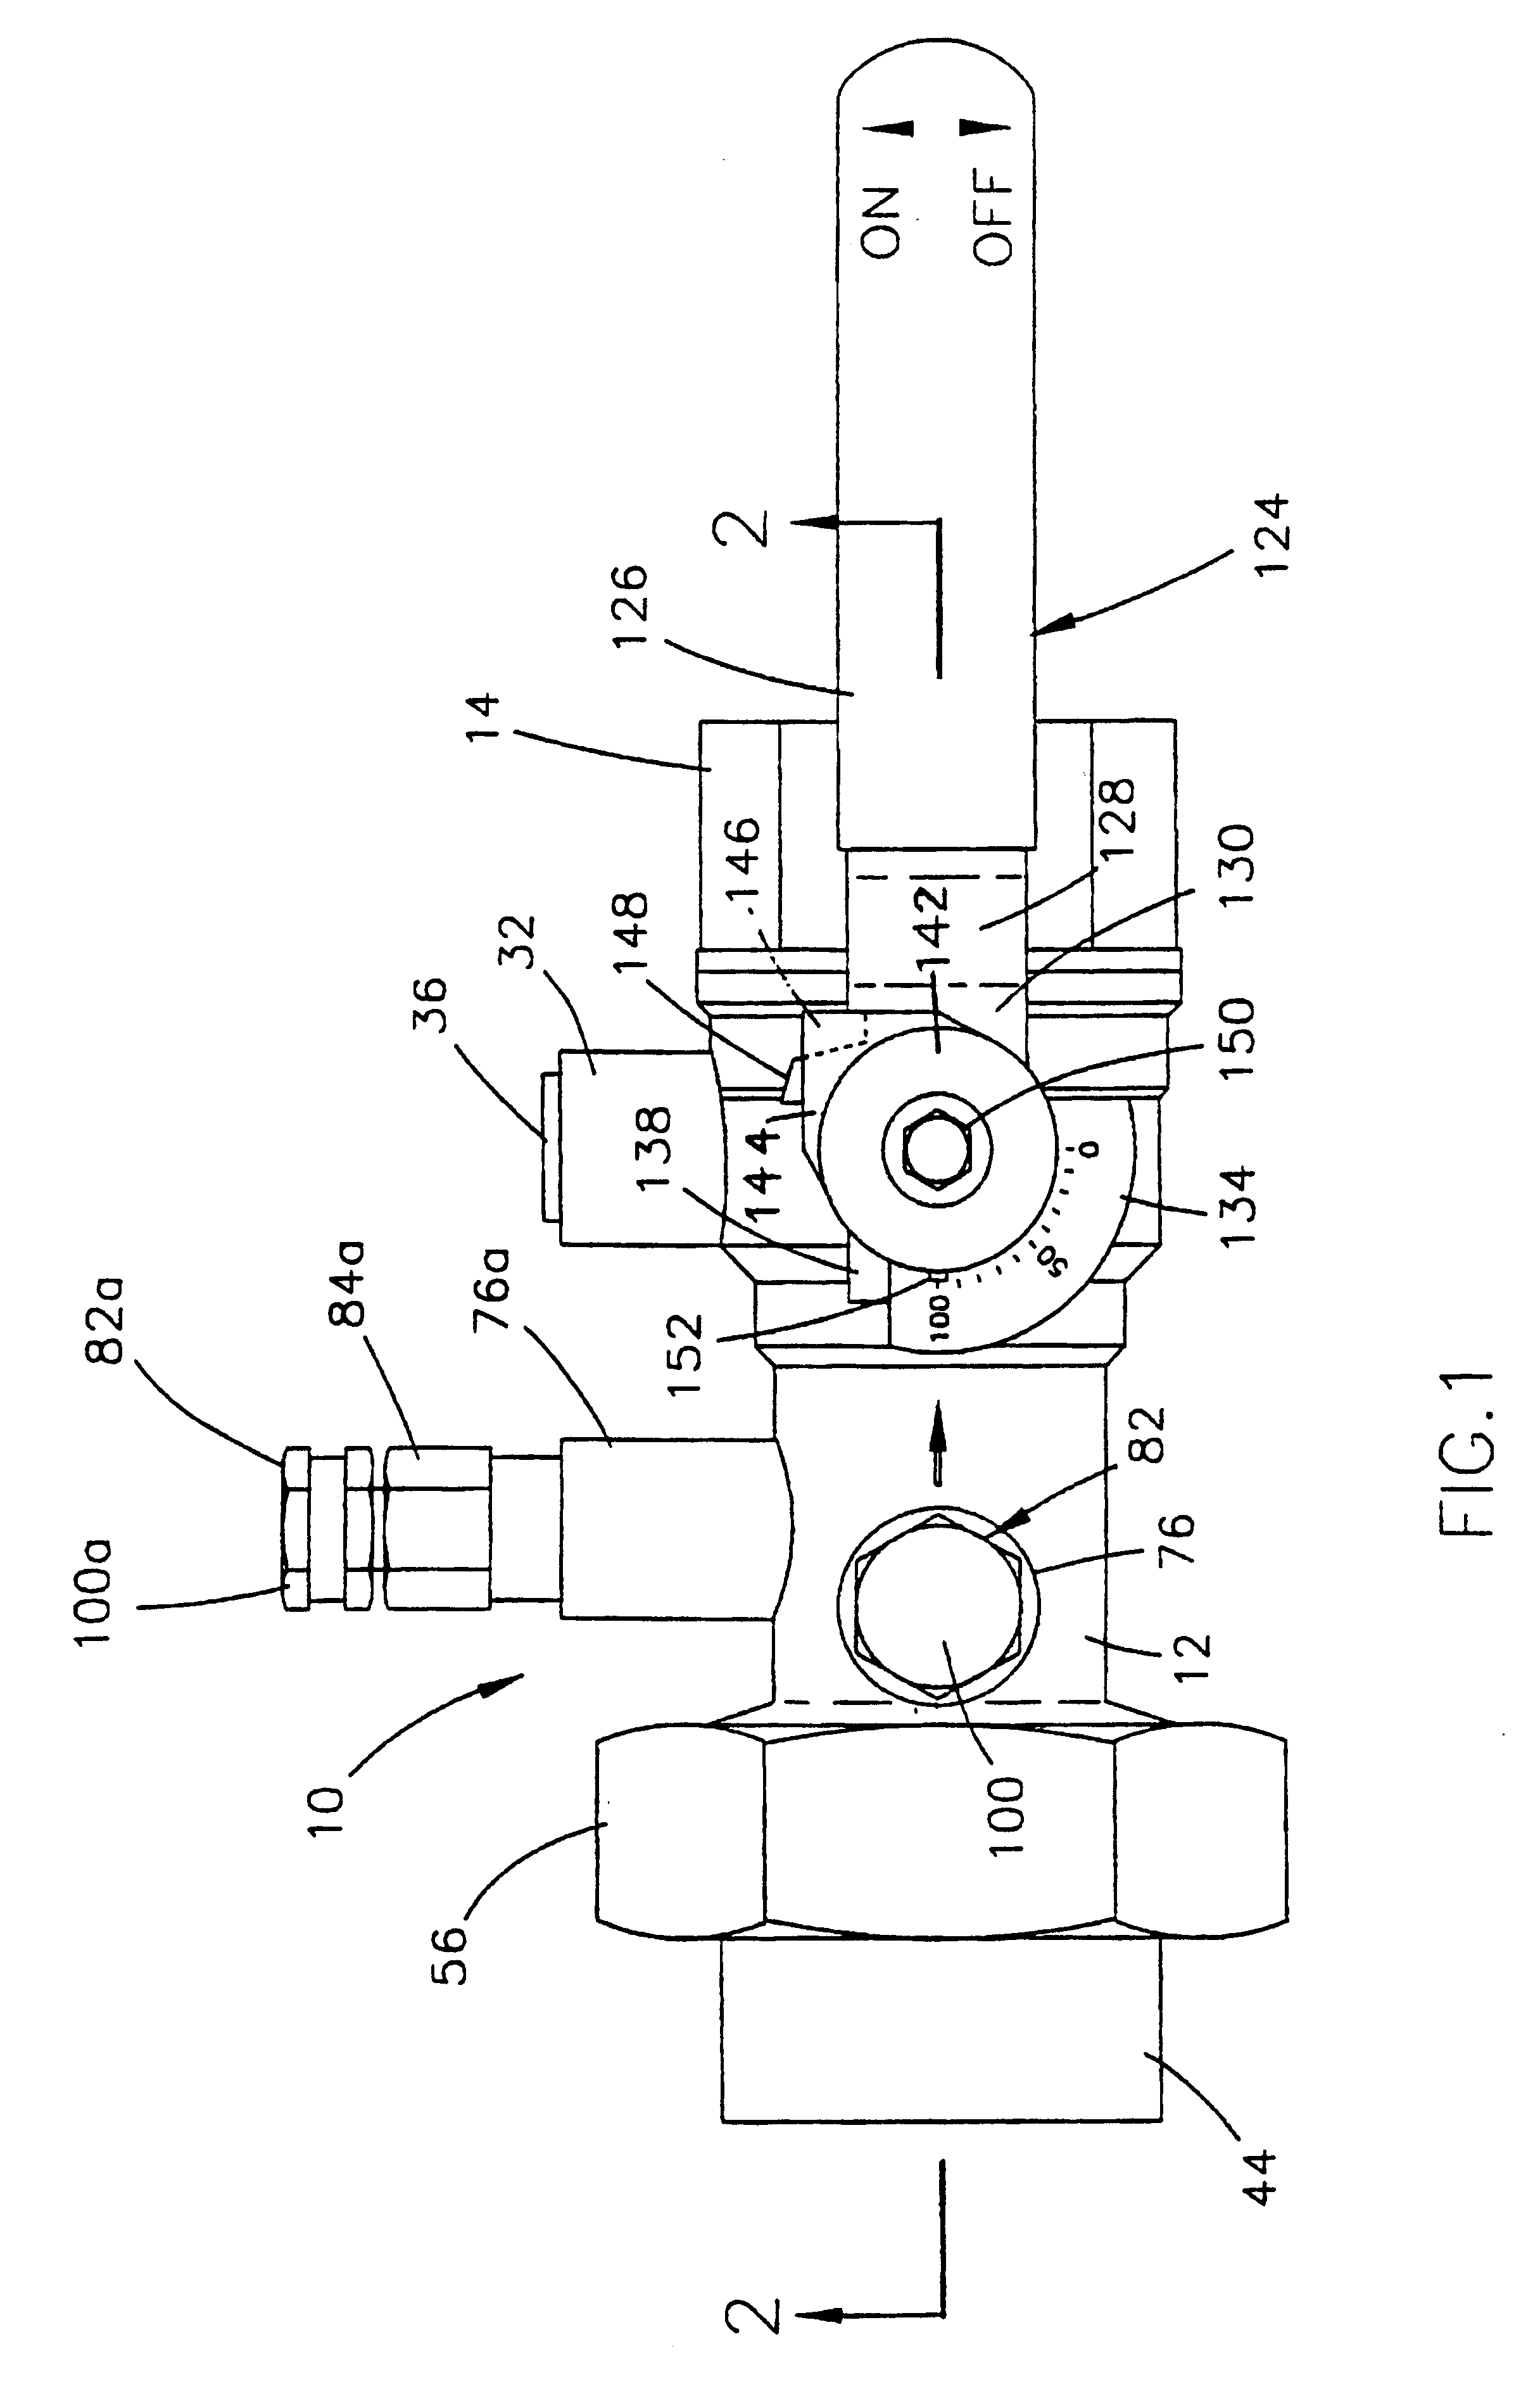 Ball valve with integrated removable flow venturi, flow balancing means, and pipe union means